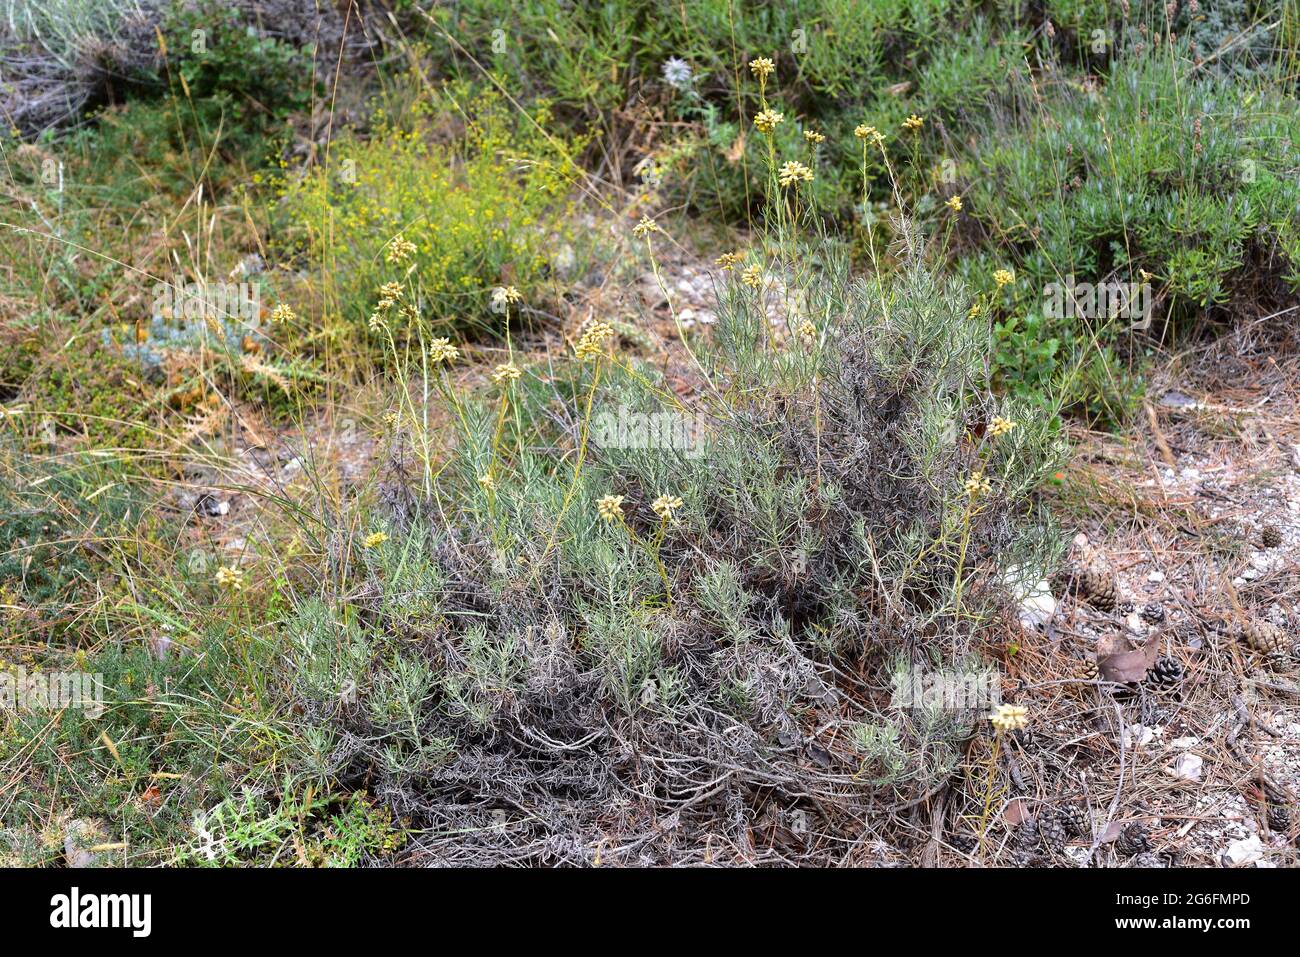 Jersey cudweed (Gnaphalium luteoalbum or Helichrysum luteoalbum) is a medicinal biennial plant native to central and southern Europe, northern Africa Stock Photo